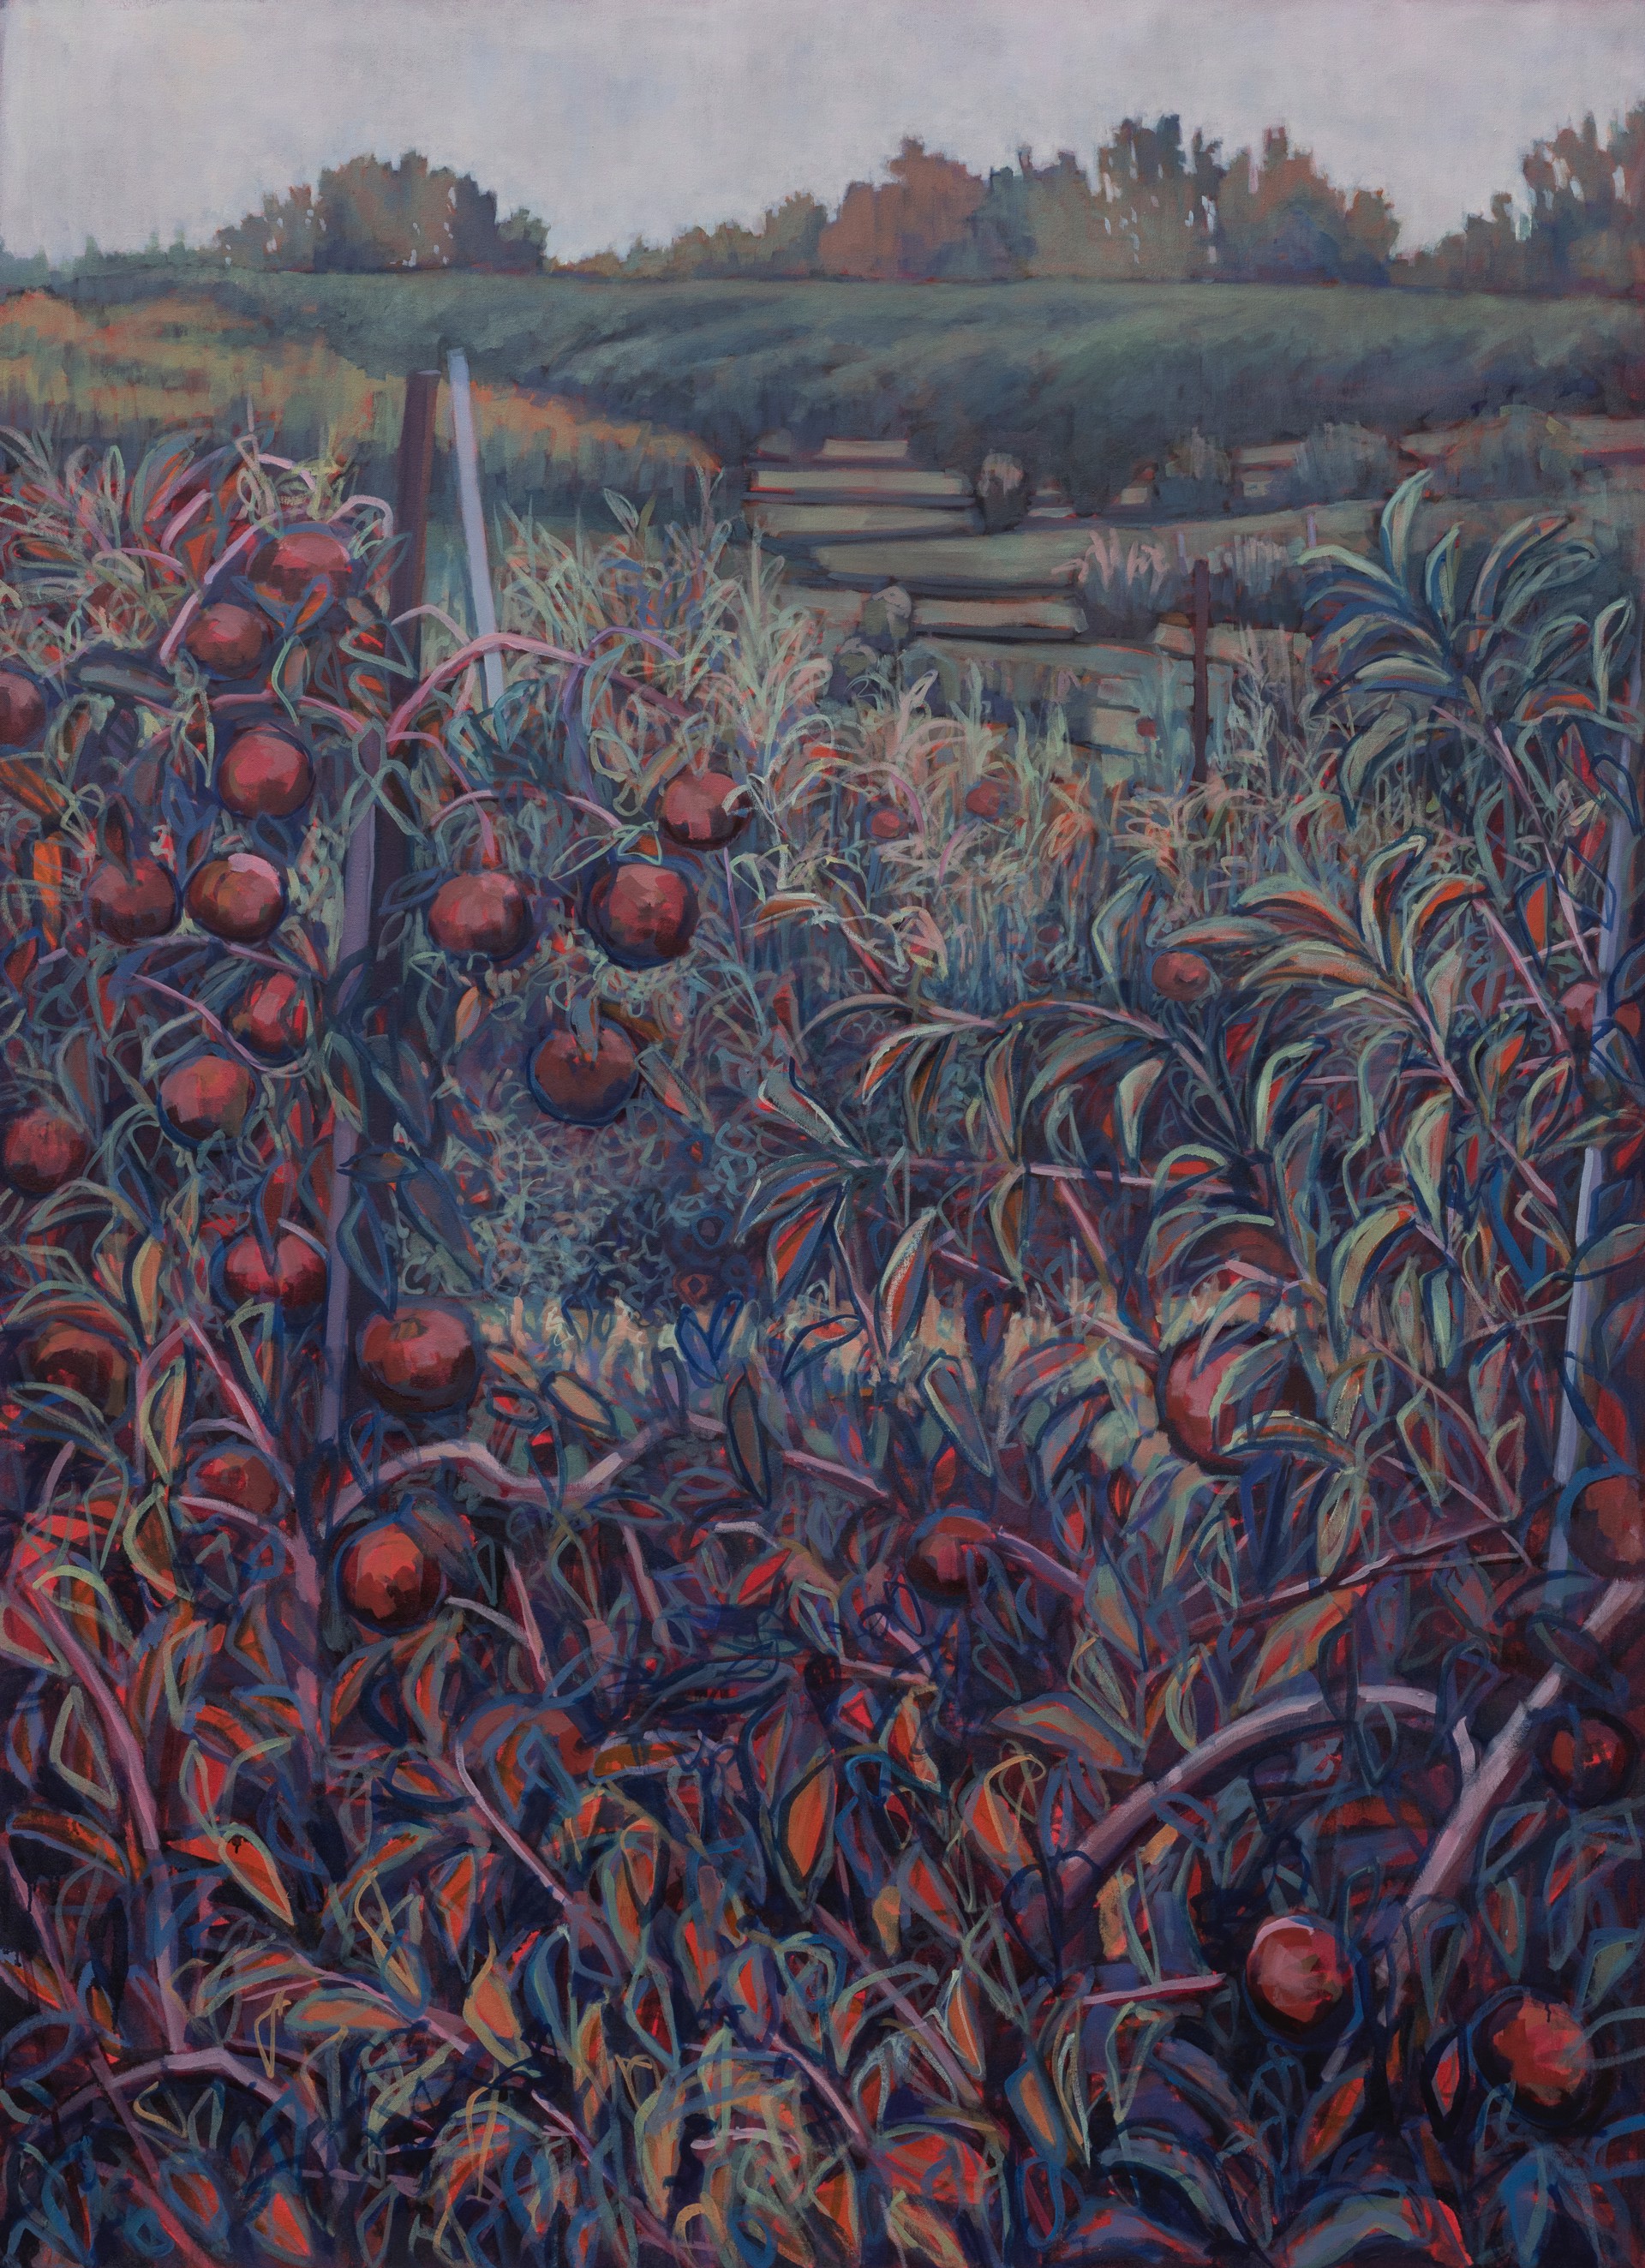 Fennville Orchard by Nina Weiss